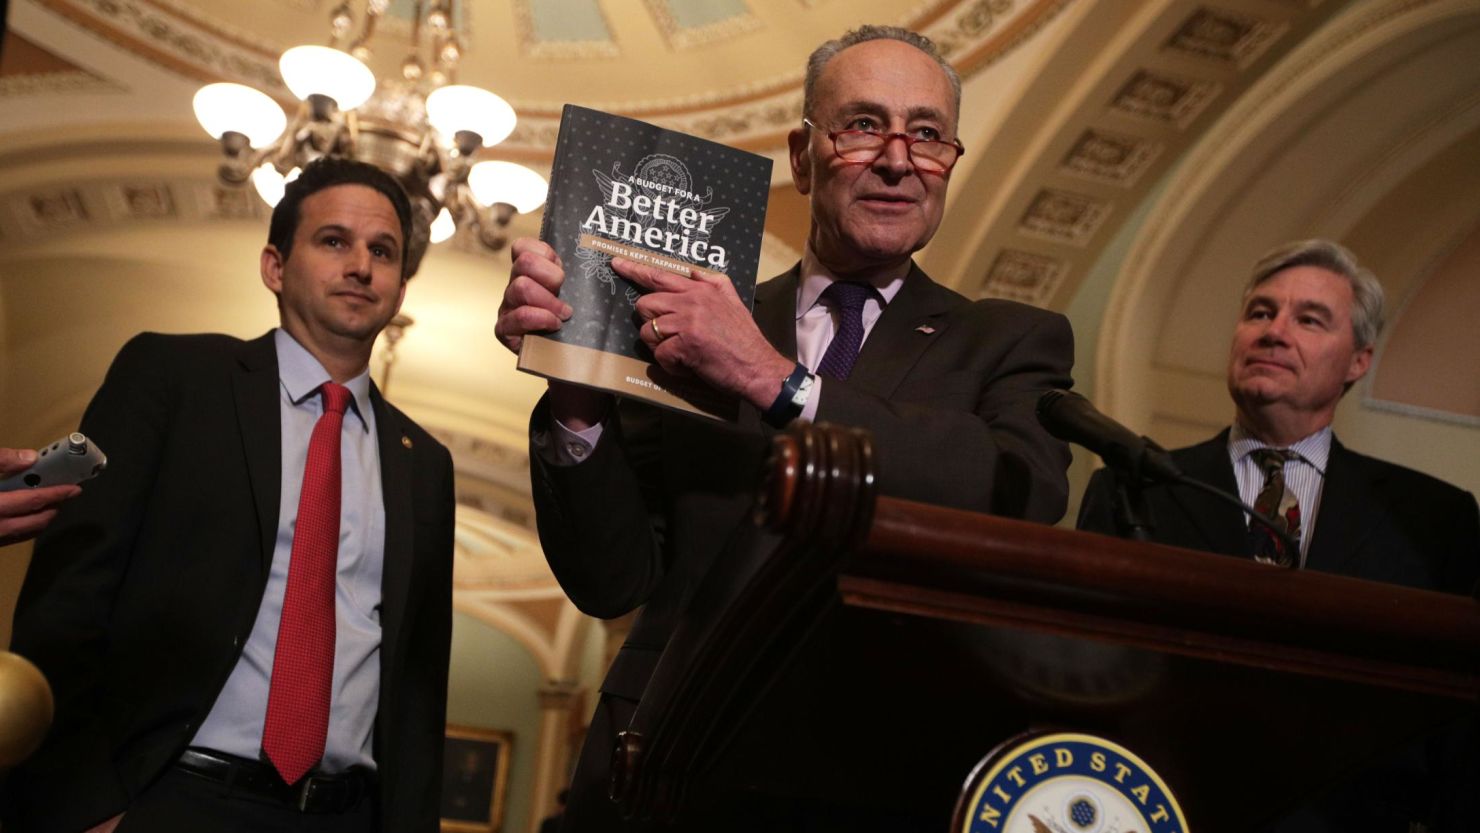 U.S. Senate Minority Leader Sen. Chuck Schumer (D-NY) (2nd L) holds up a copy of U.S. President Donald Trump's FY2020 budget request as Sen. Brian Schatz (D-HI) (L) and Sen. Sheldon Whitehouse (D-RI) (R) look on during a news briefing after the weekly Senate Democratic policy luncheon March 12, 2019 at the U.S. Capitol in Washington, DC.   (Alex Wong/Getty Images)